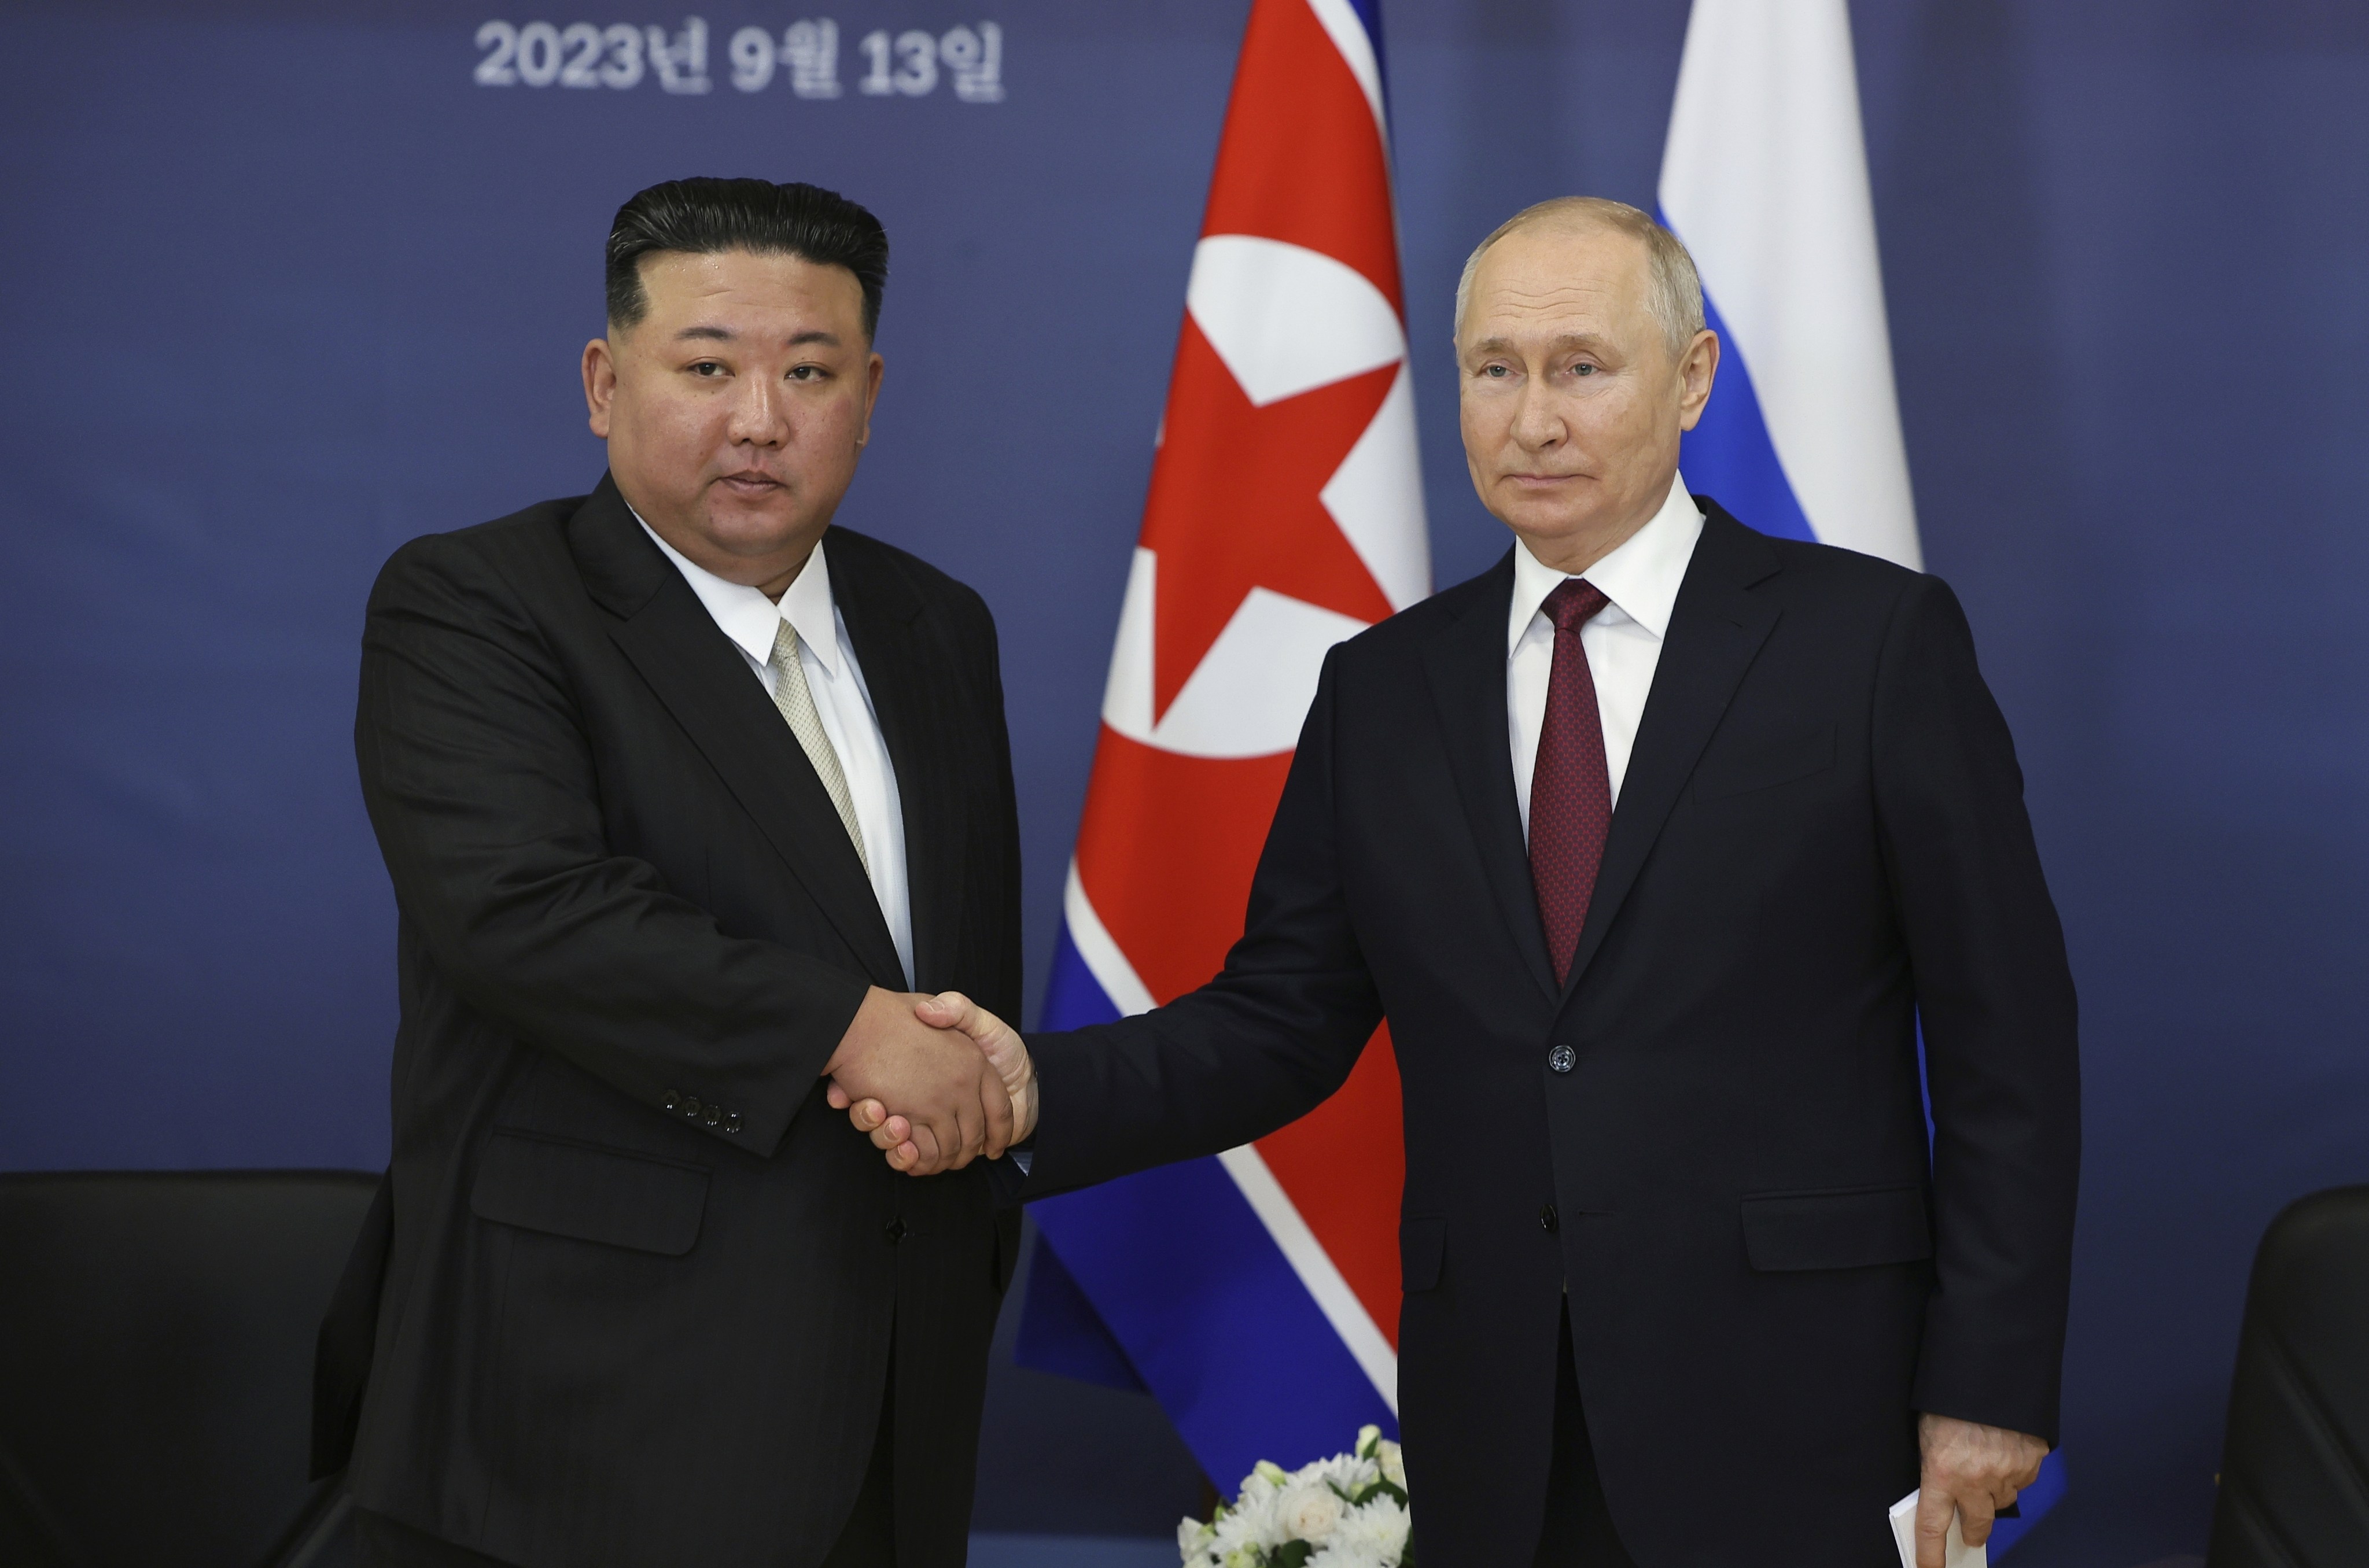 Russian President Vladimir Putin and North Korea’s leader Kim Jong-Un during their meeting at the Vostochny cosmodrome outside the city of Tsiolkovsky, about 200 kilometers from the city of Blagoveshchensk in the far eastern Amur region of Russia, in September last year. Photo: AP